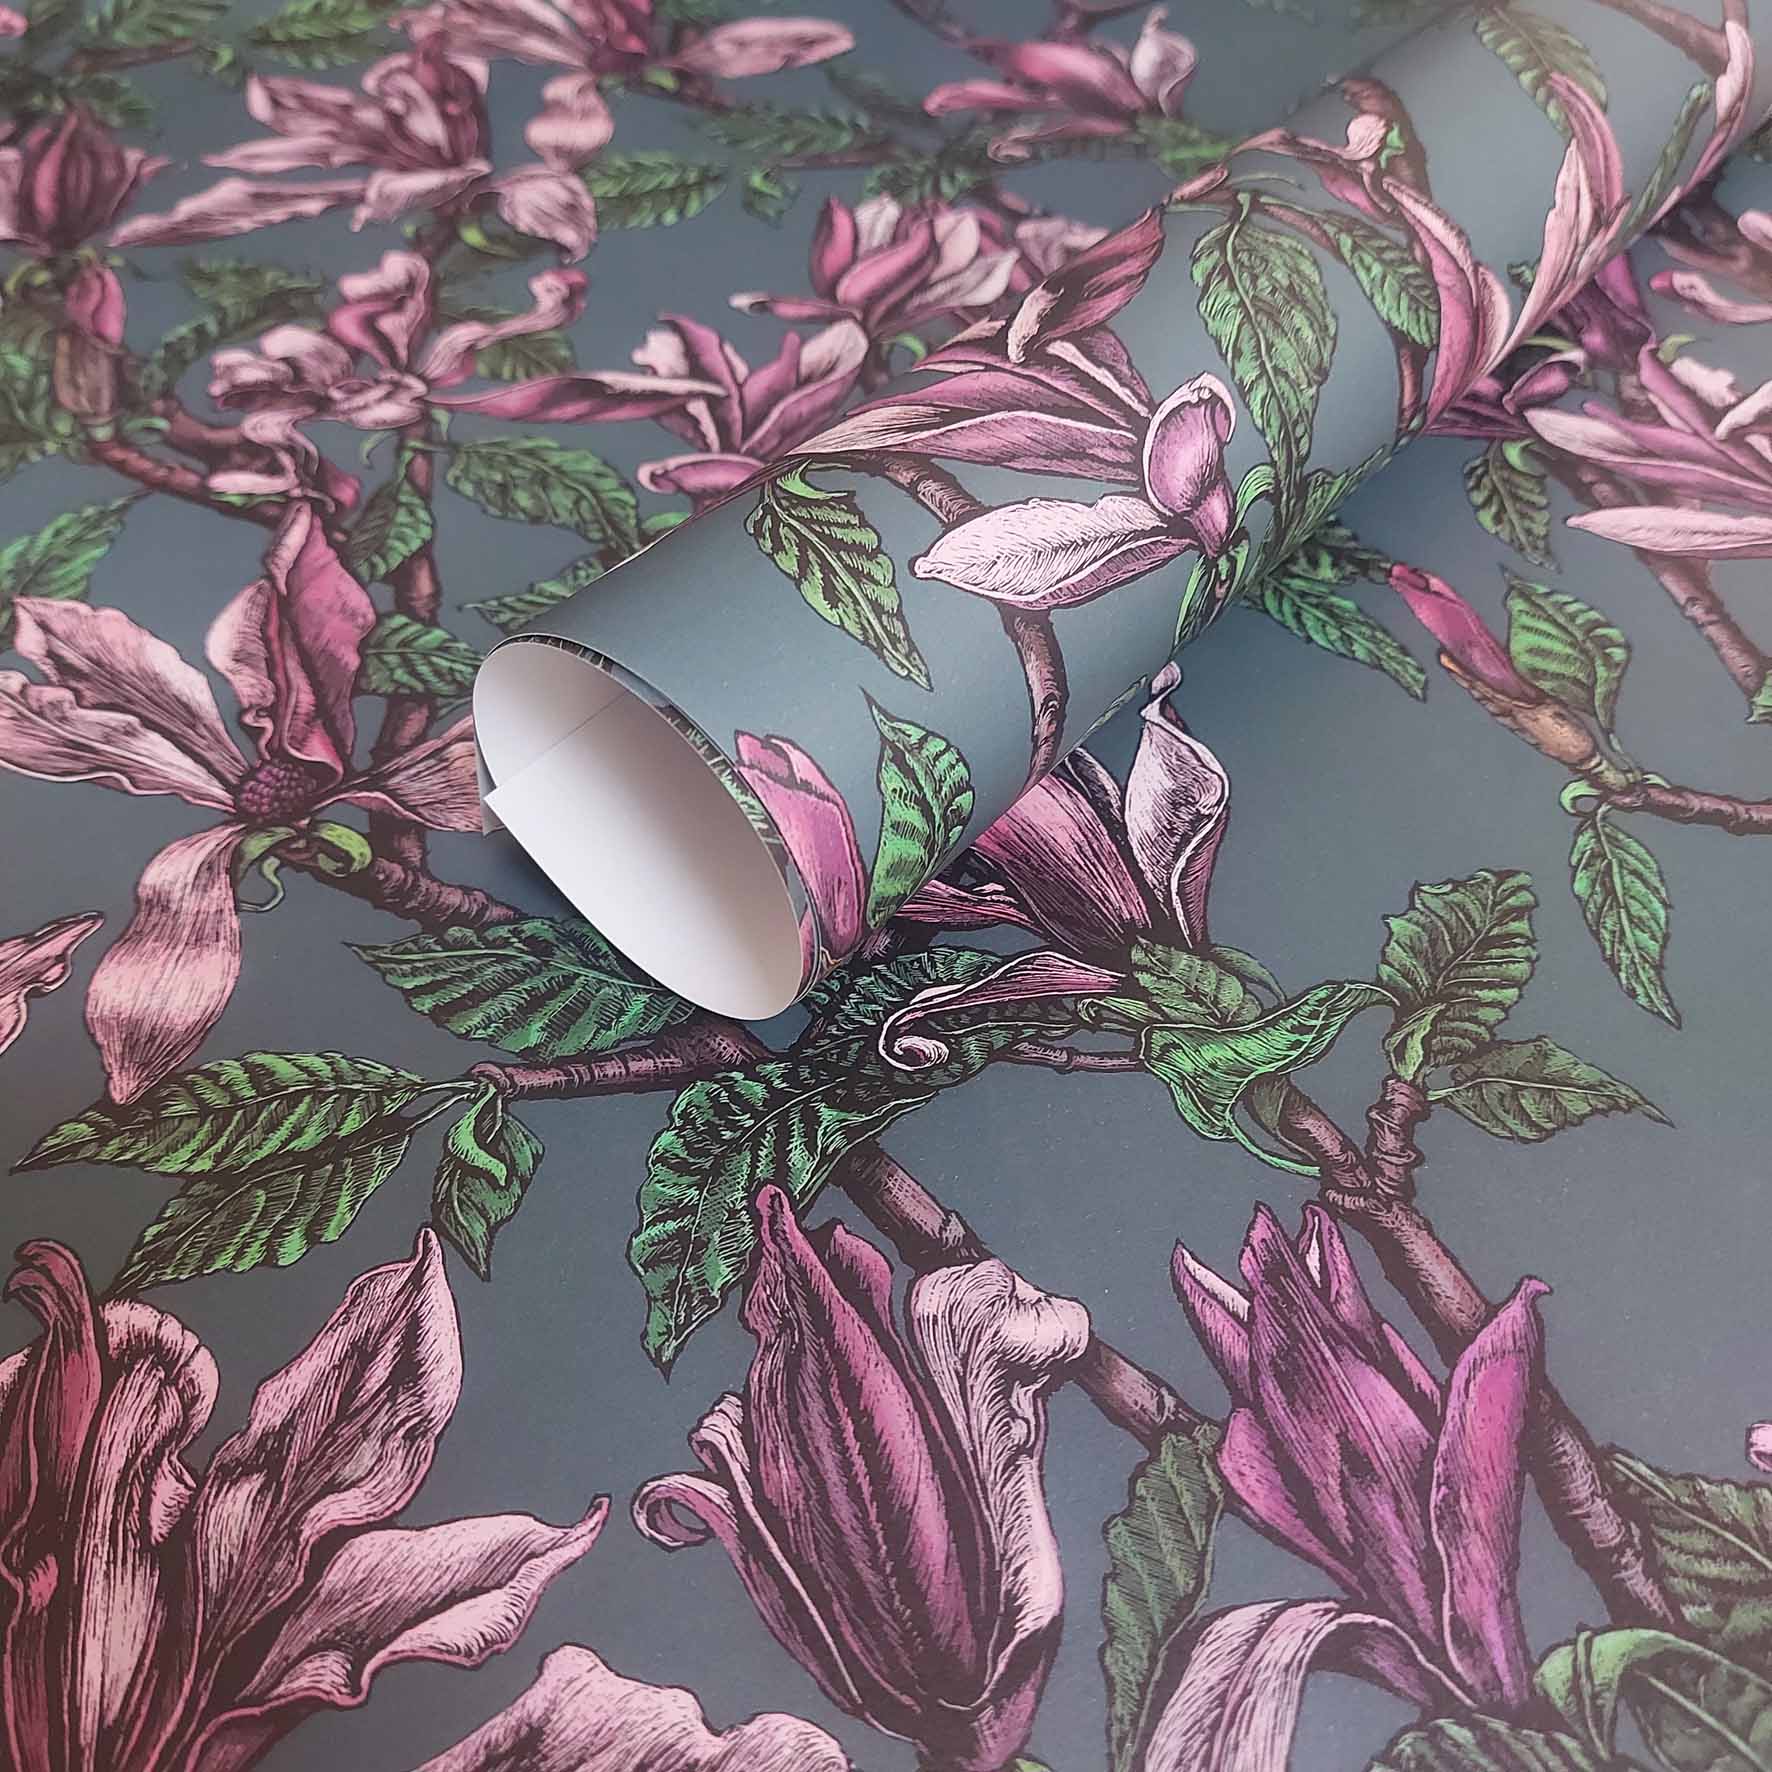 Wrapping paper with magnolia based on a scraperboard design by Rachel Meehan